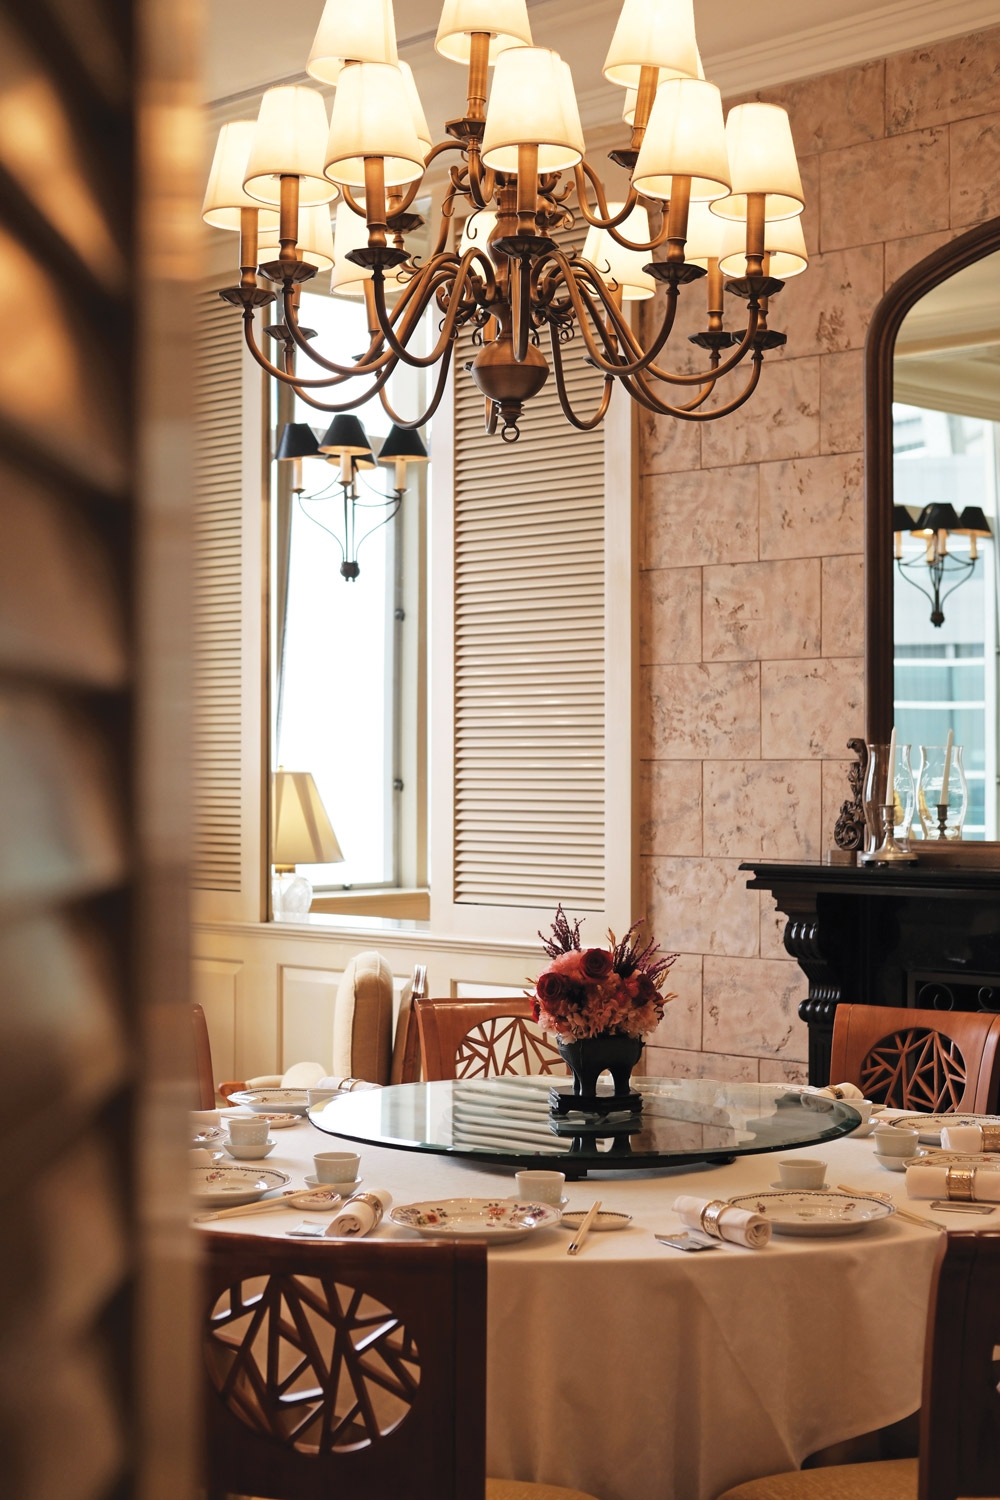 With its traditional European-style charm, the restaurant’s elegant private rooms are perfect for a special occasion with that special someone.